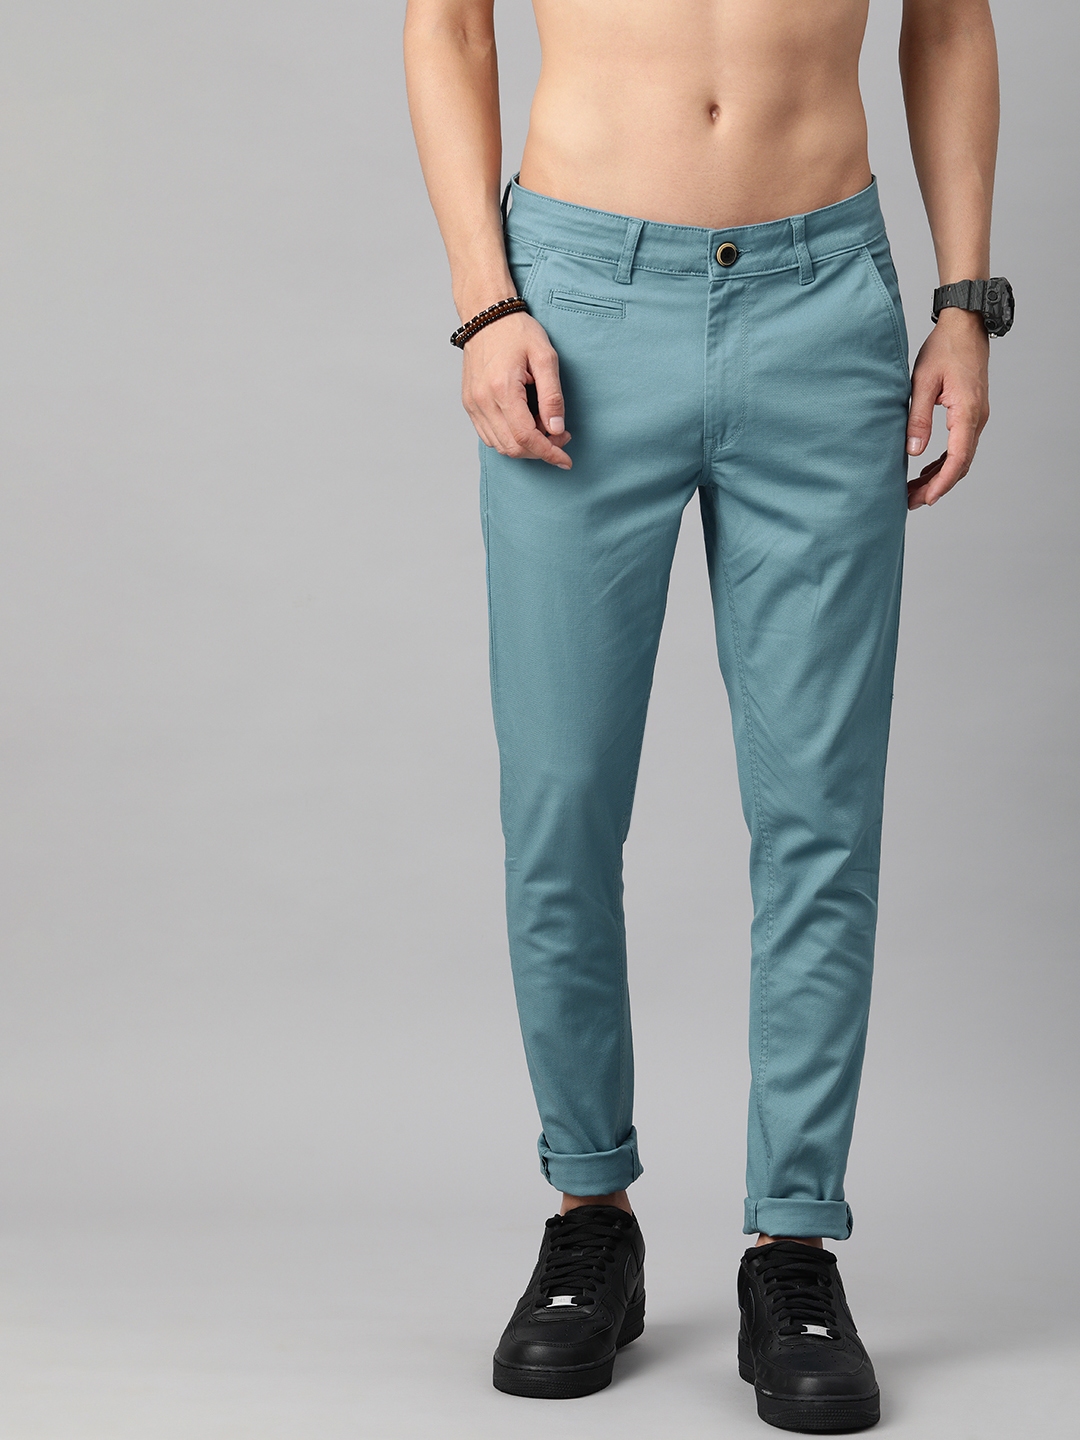 Buy Roadster Men Teal Blue Chinos Trousers - Trousers for Men 13859410 ...